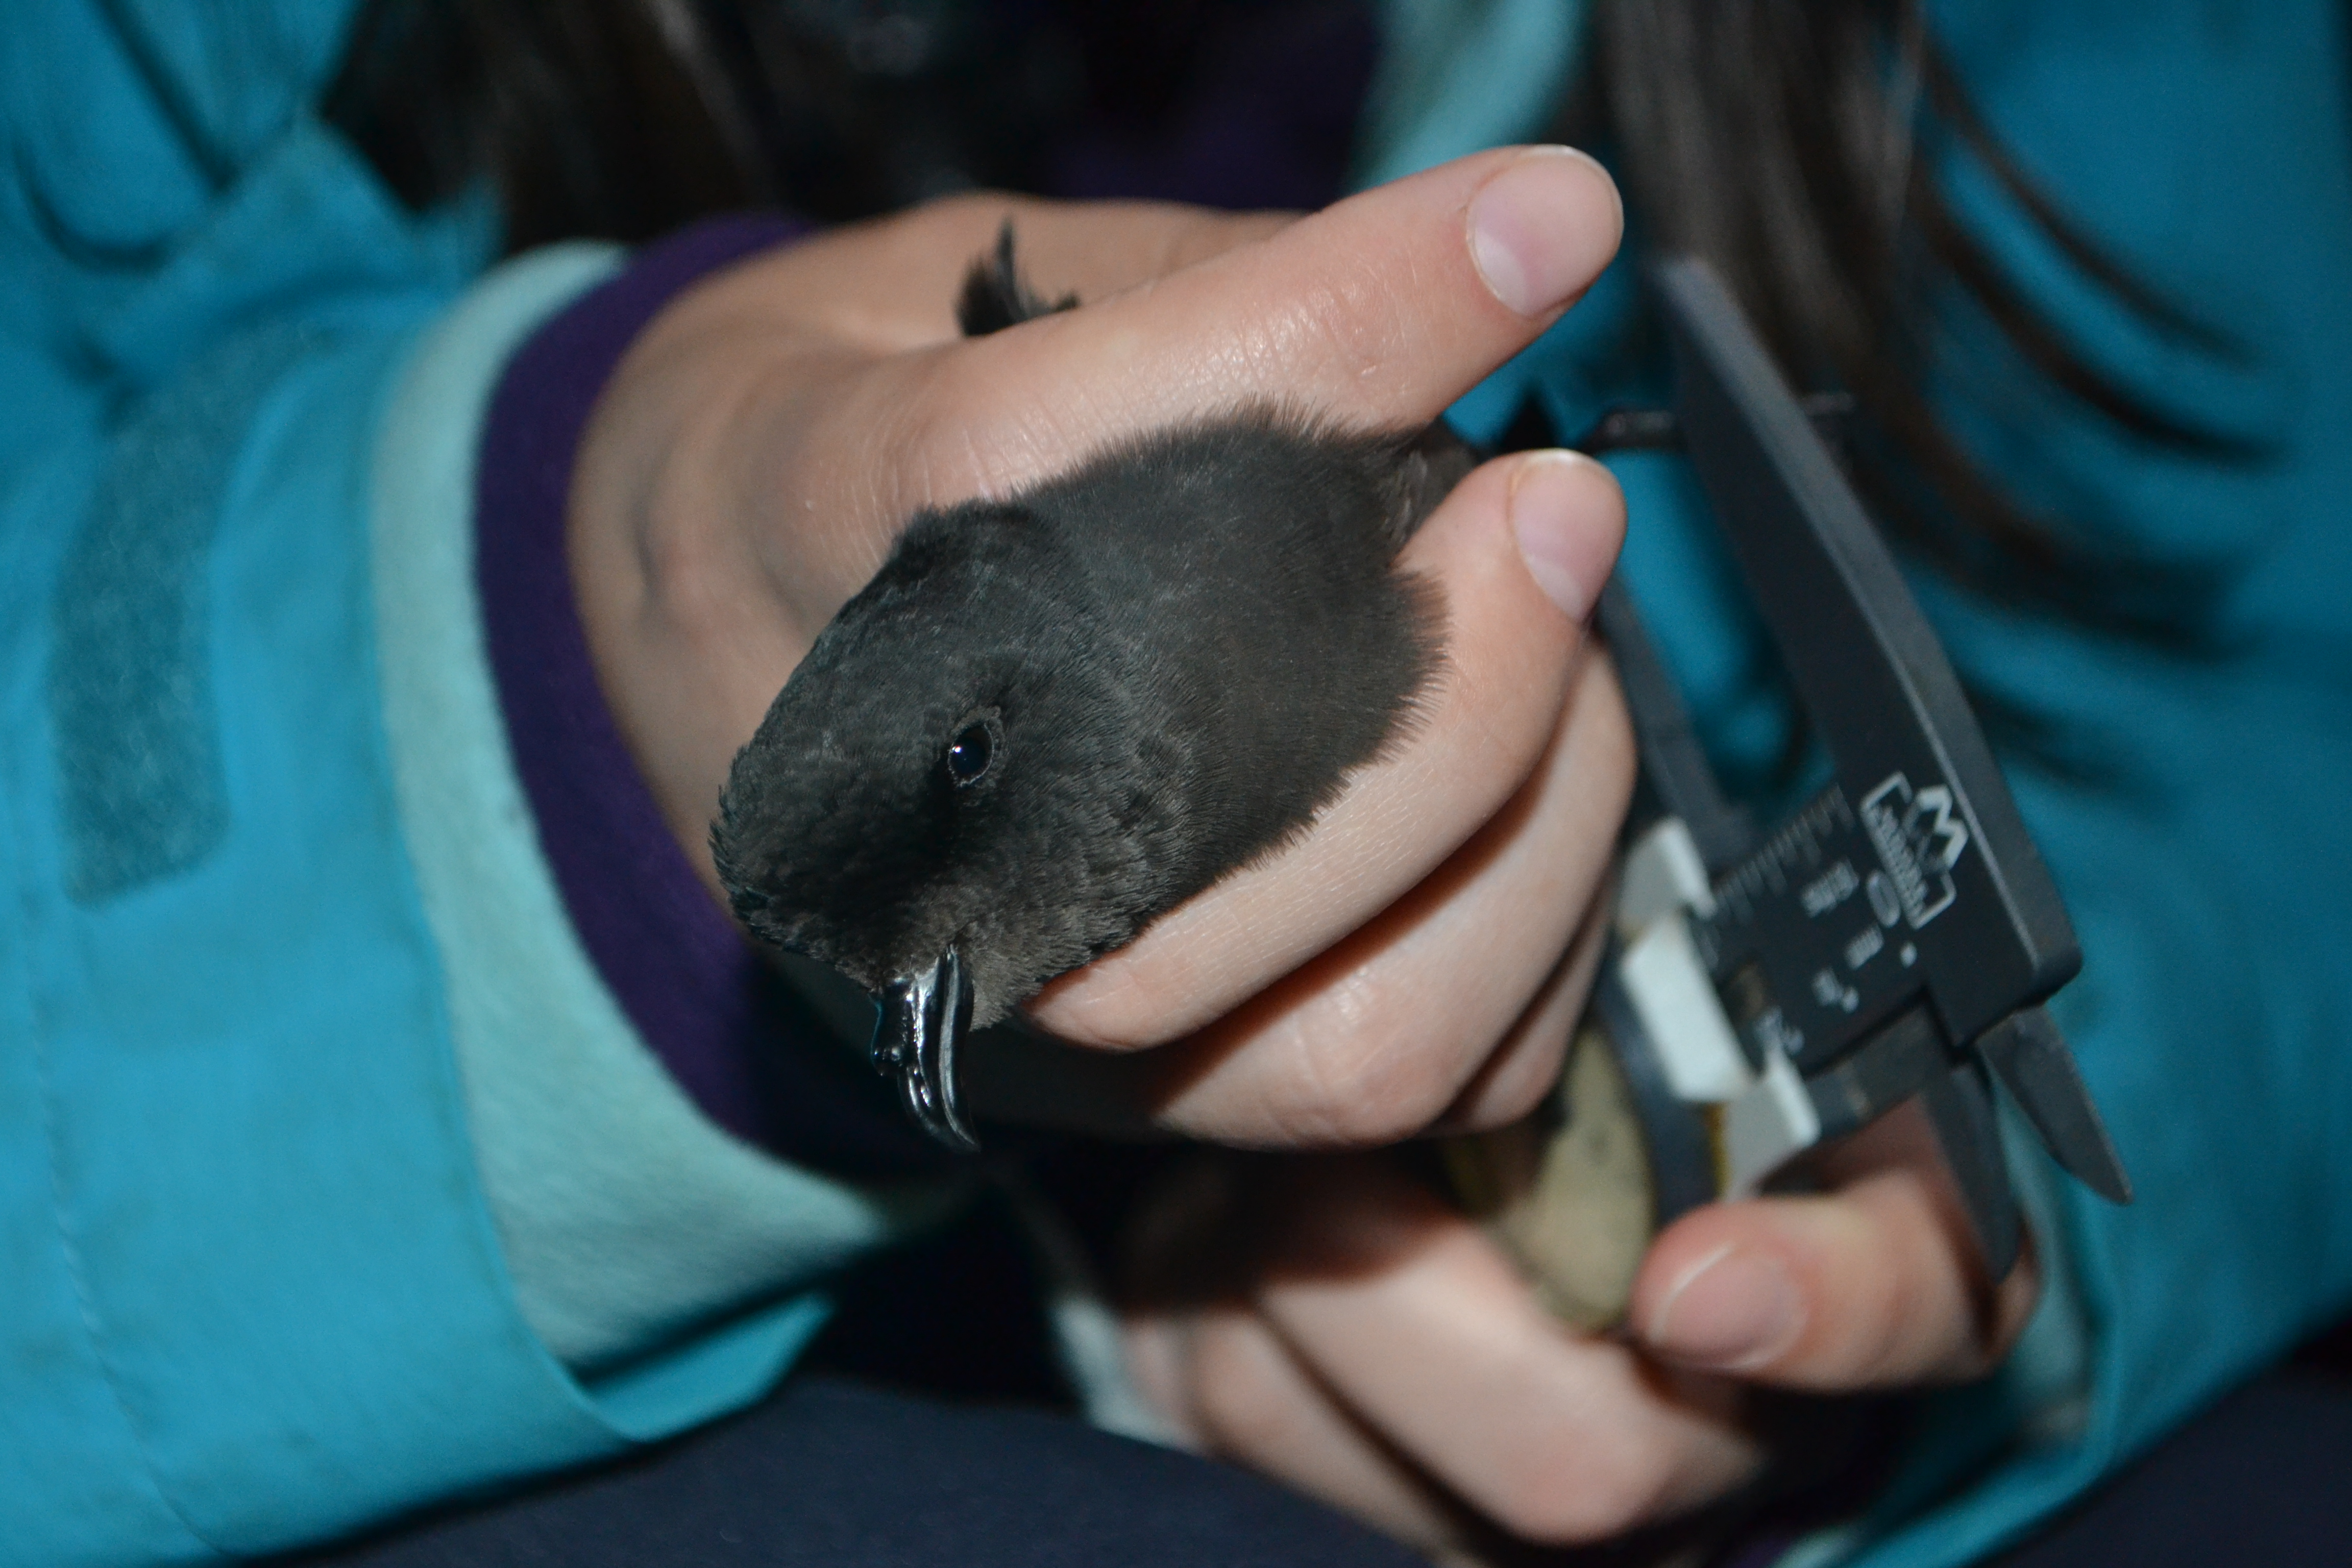 A Rocha Portugal has ringed > 5,000 European Storm-petrels as part of research into their survival strategies.